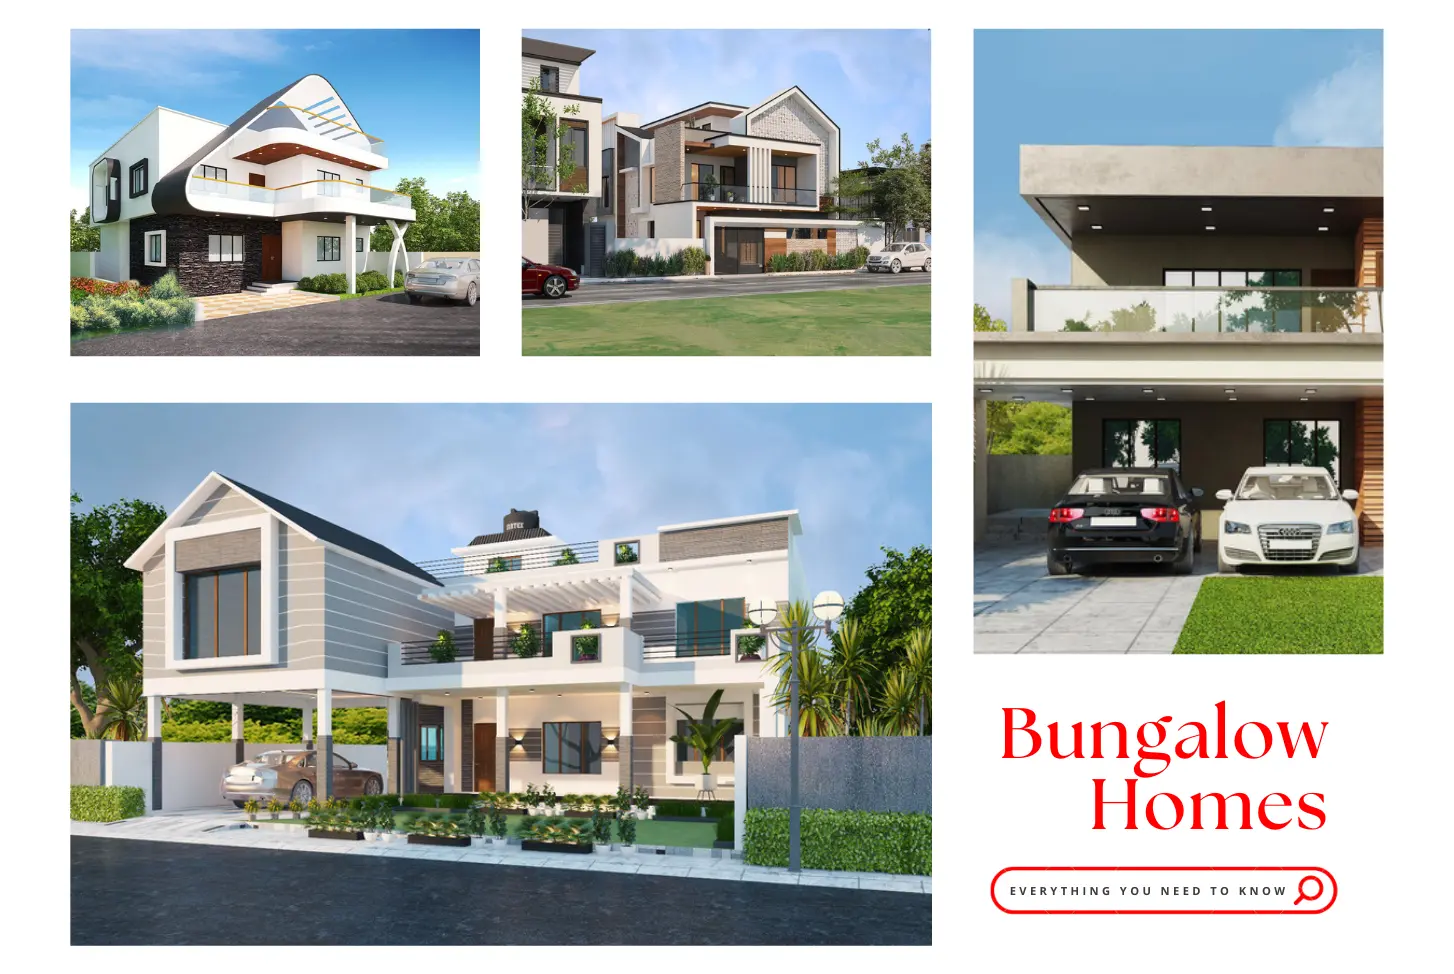 Bungalow Homes: Everything You Need To Know